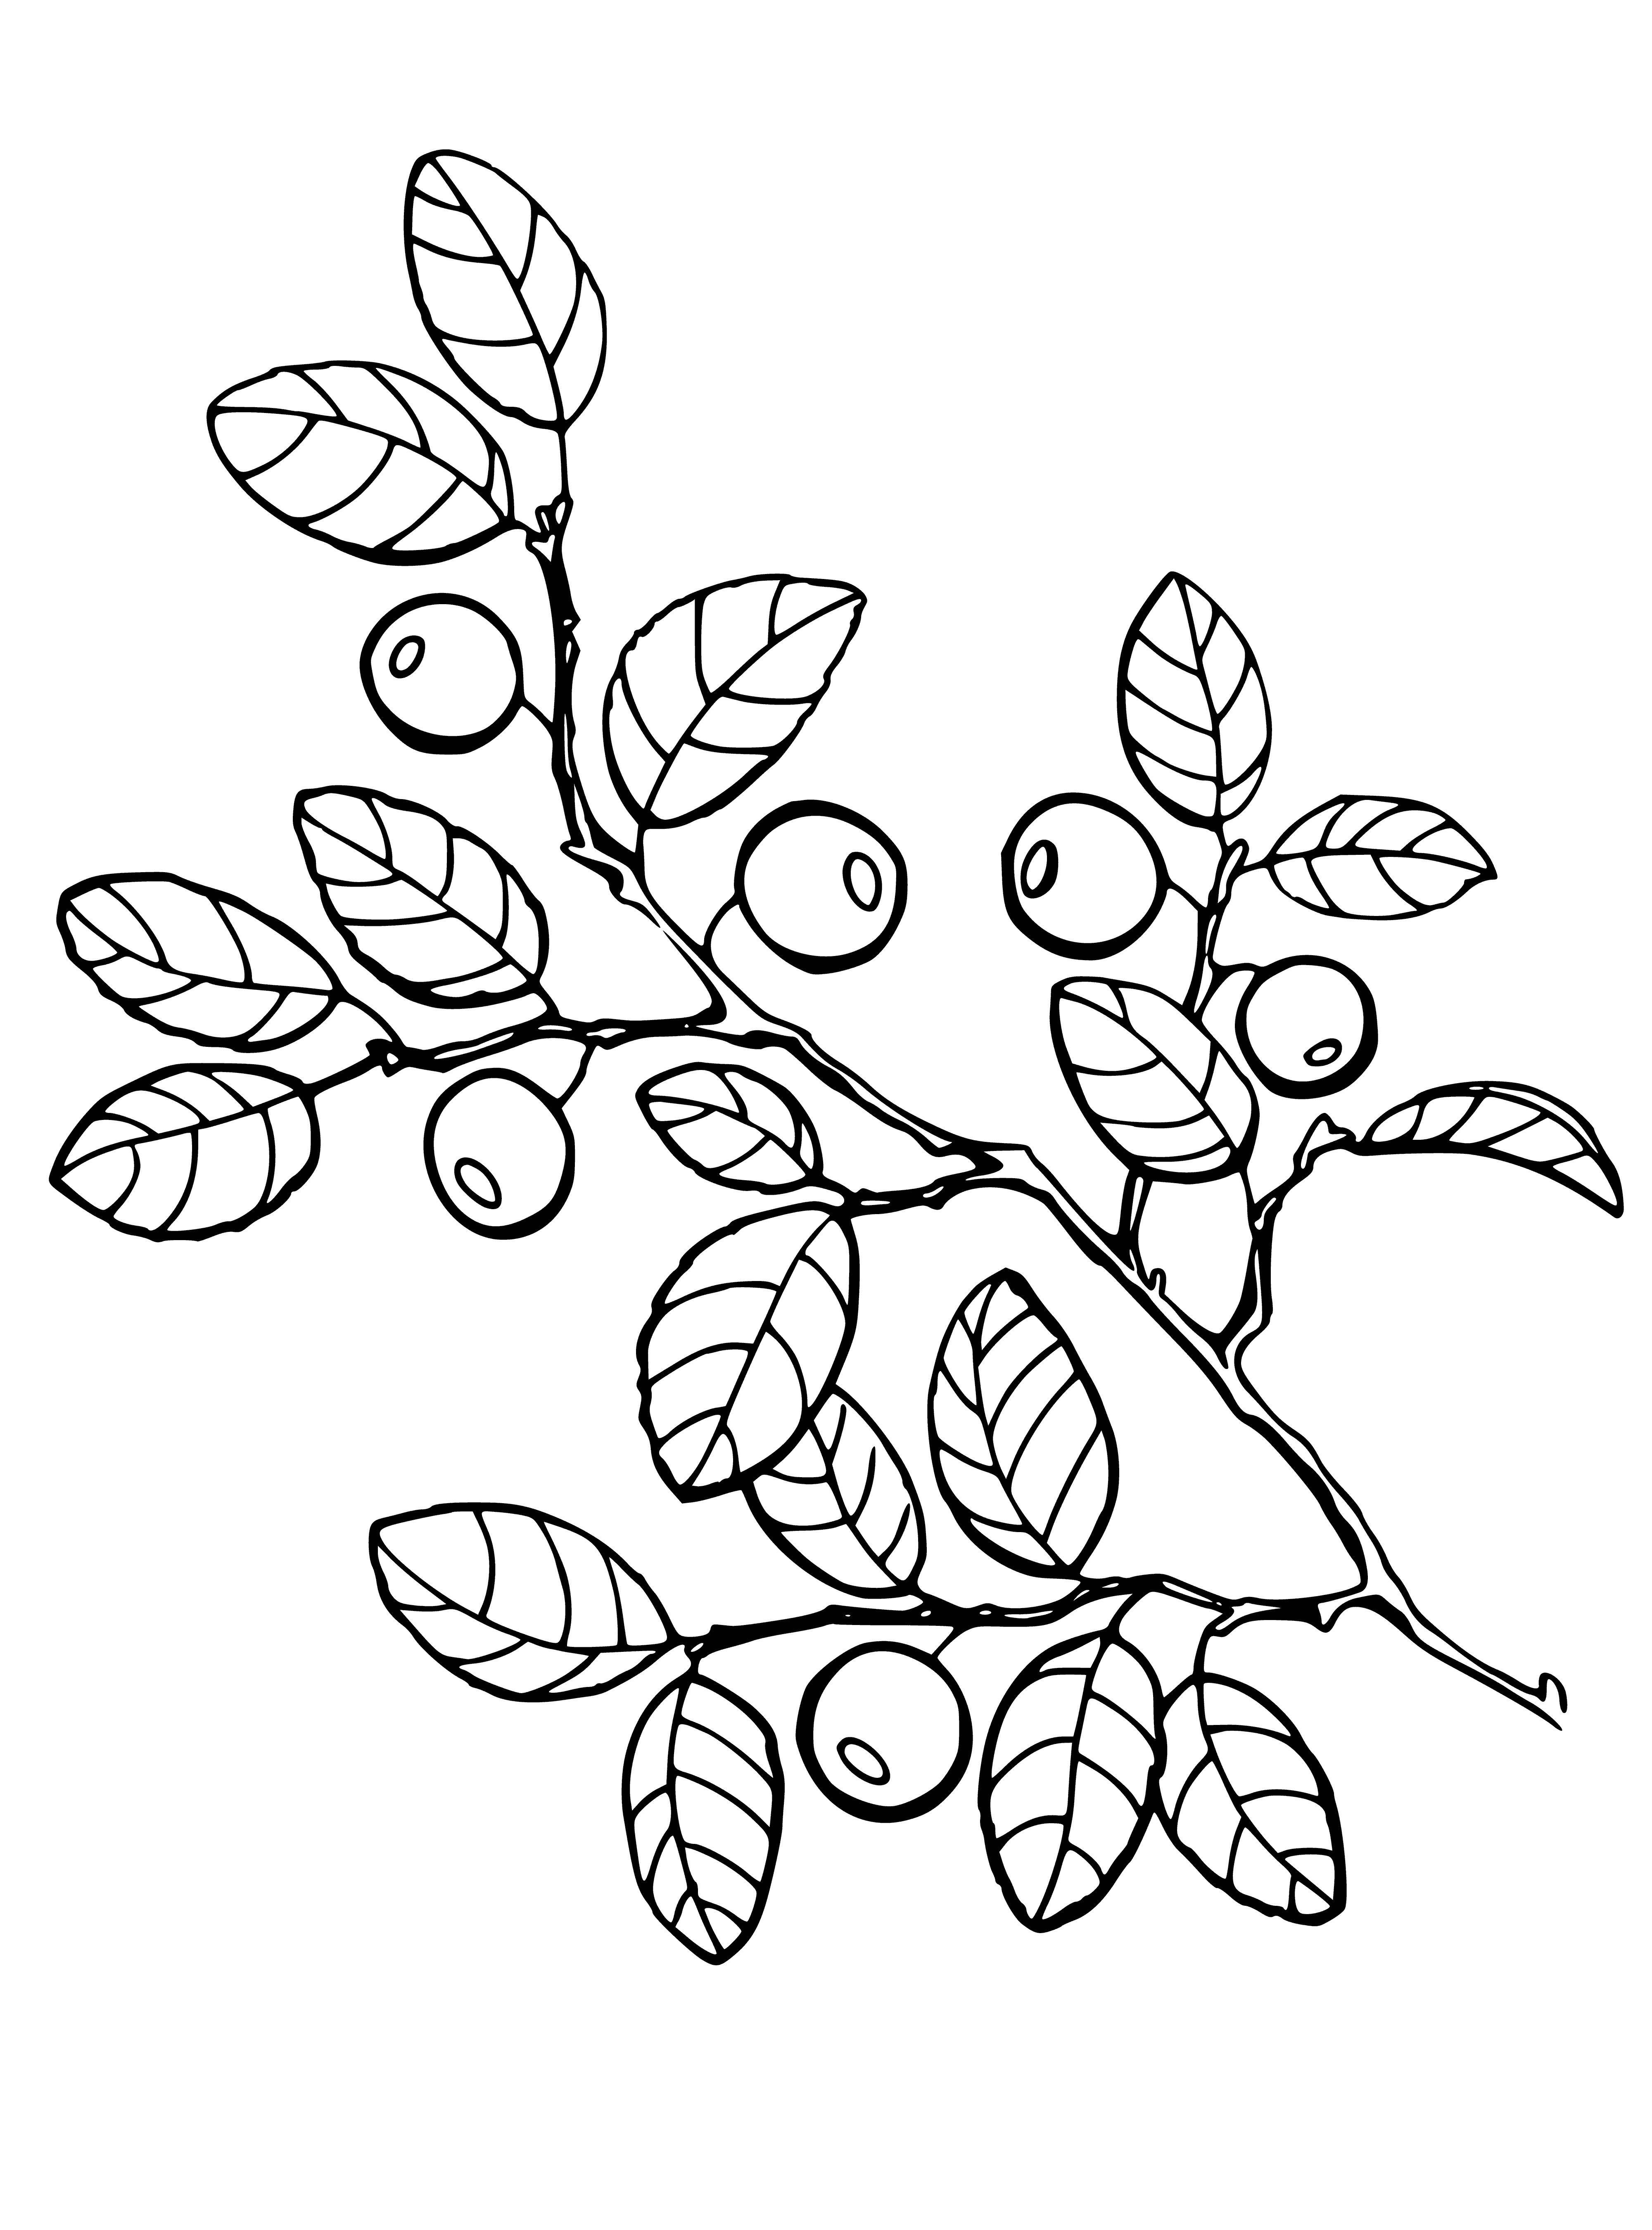 coloring page: Small, dark blue berries clustered on a thin, woody stem with oval-shaped green leaves.